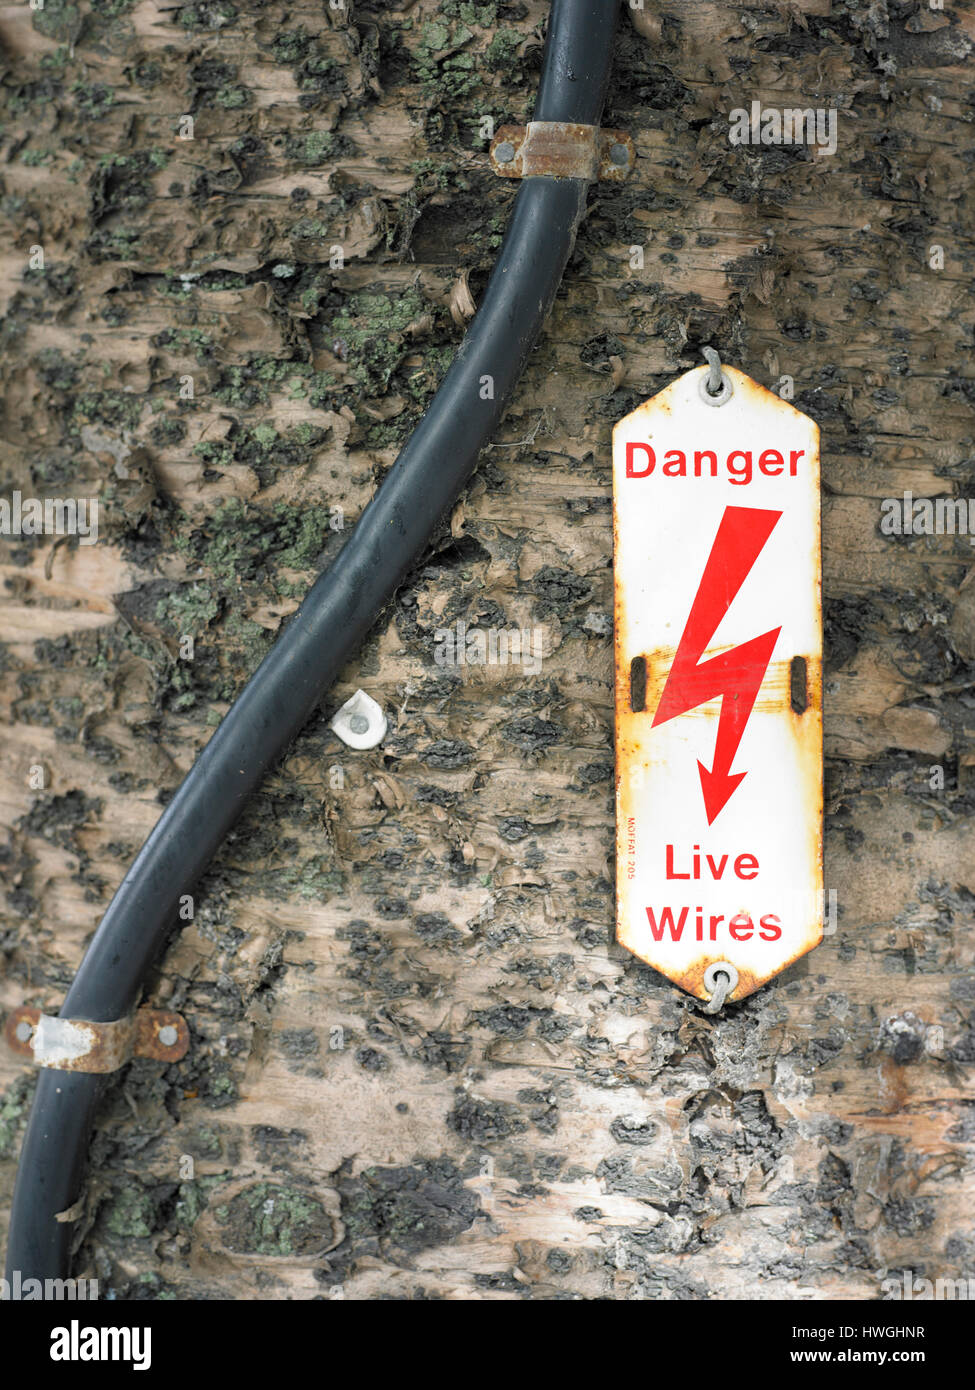 Danger live wires sign and high power cable Stock Photo